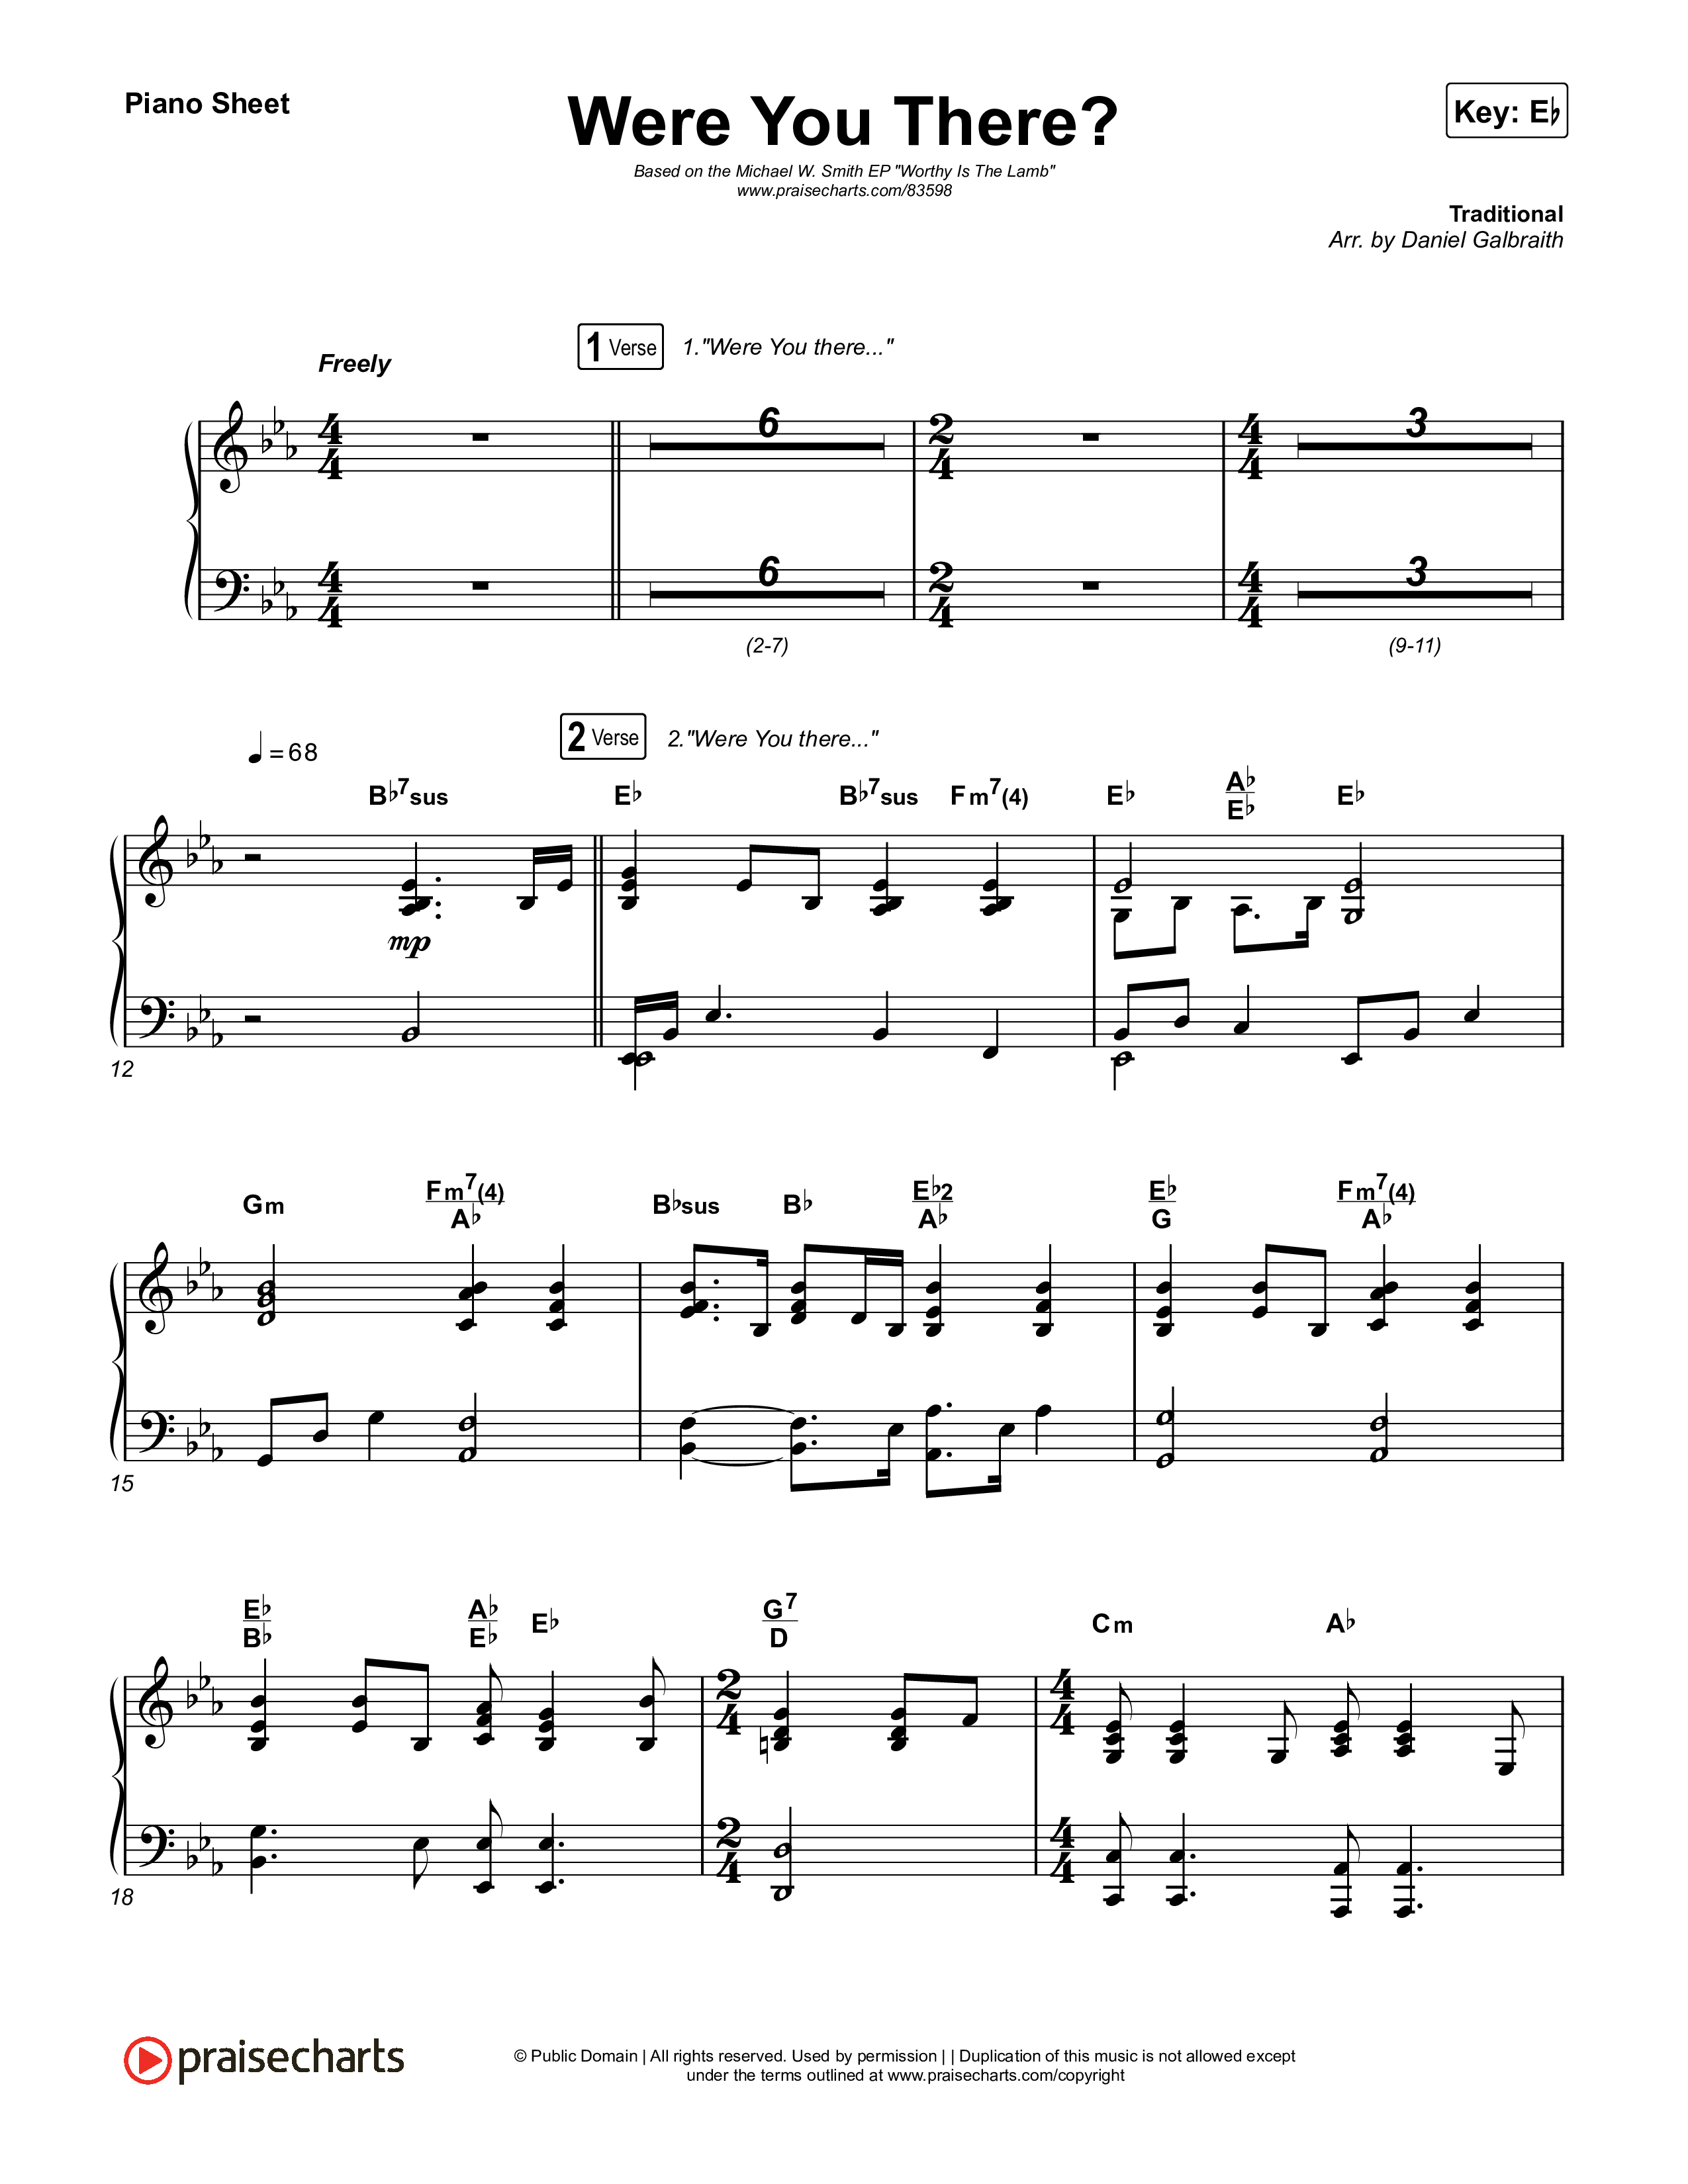 Were You There (Live) Piano Sheet (Michael W. Smith)